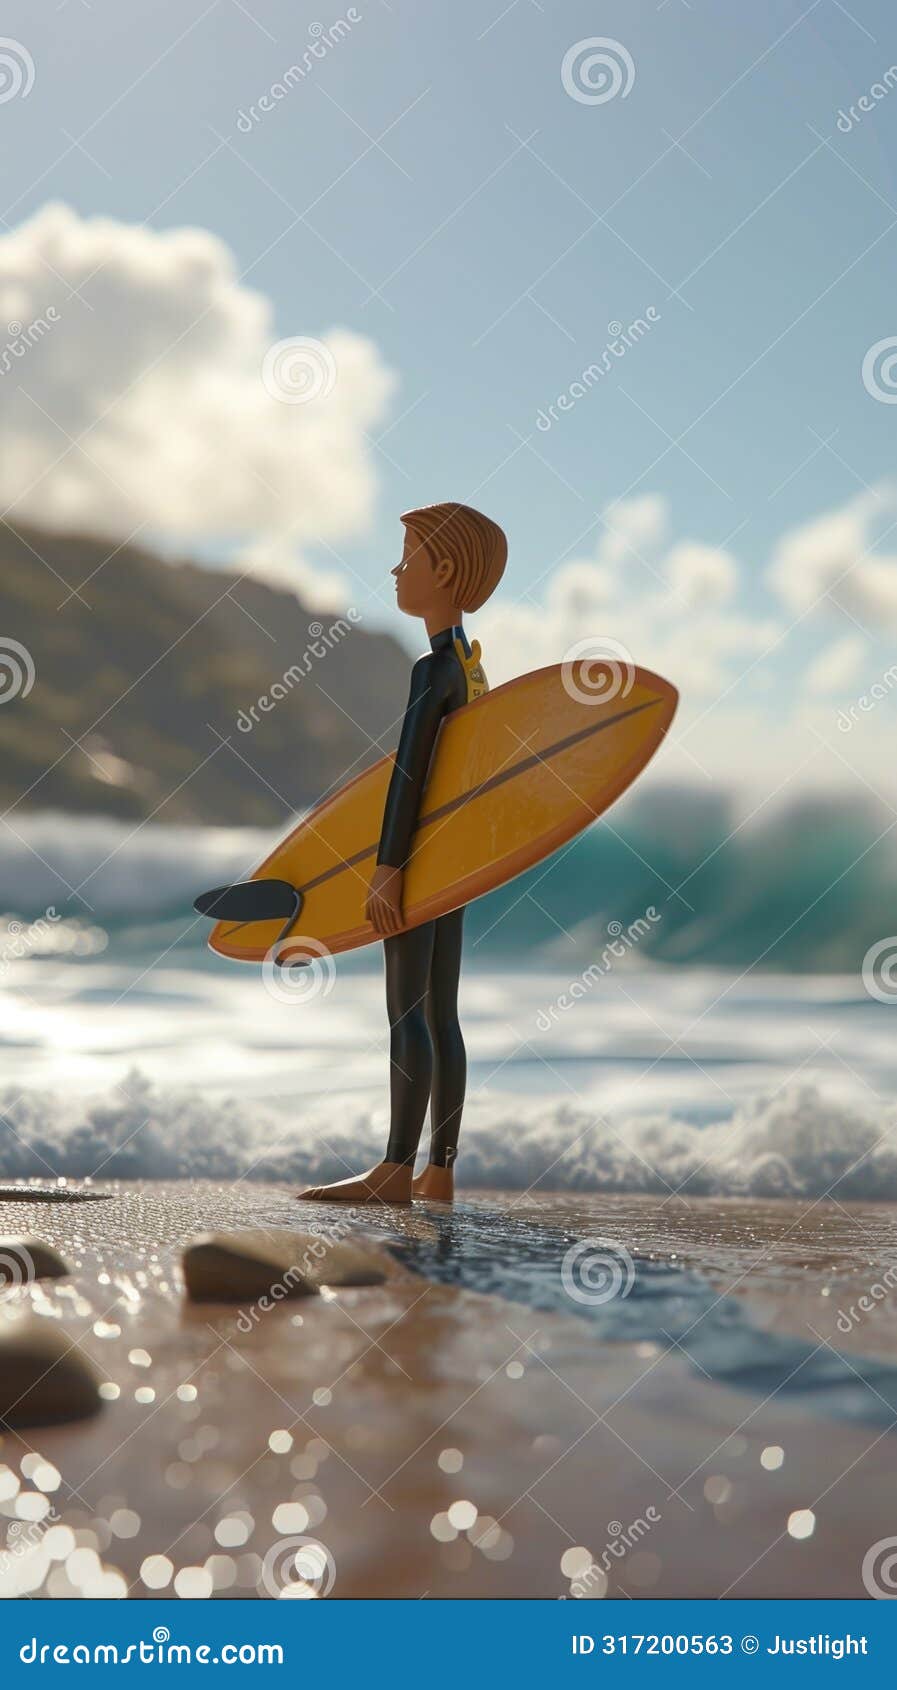 cartoon digital avatars of a surf instructor on a beach, holding a surfboard, with a wetsuit and a boogie board sped to